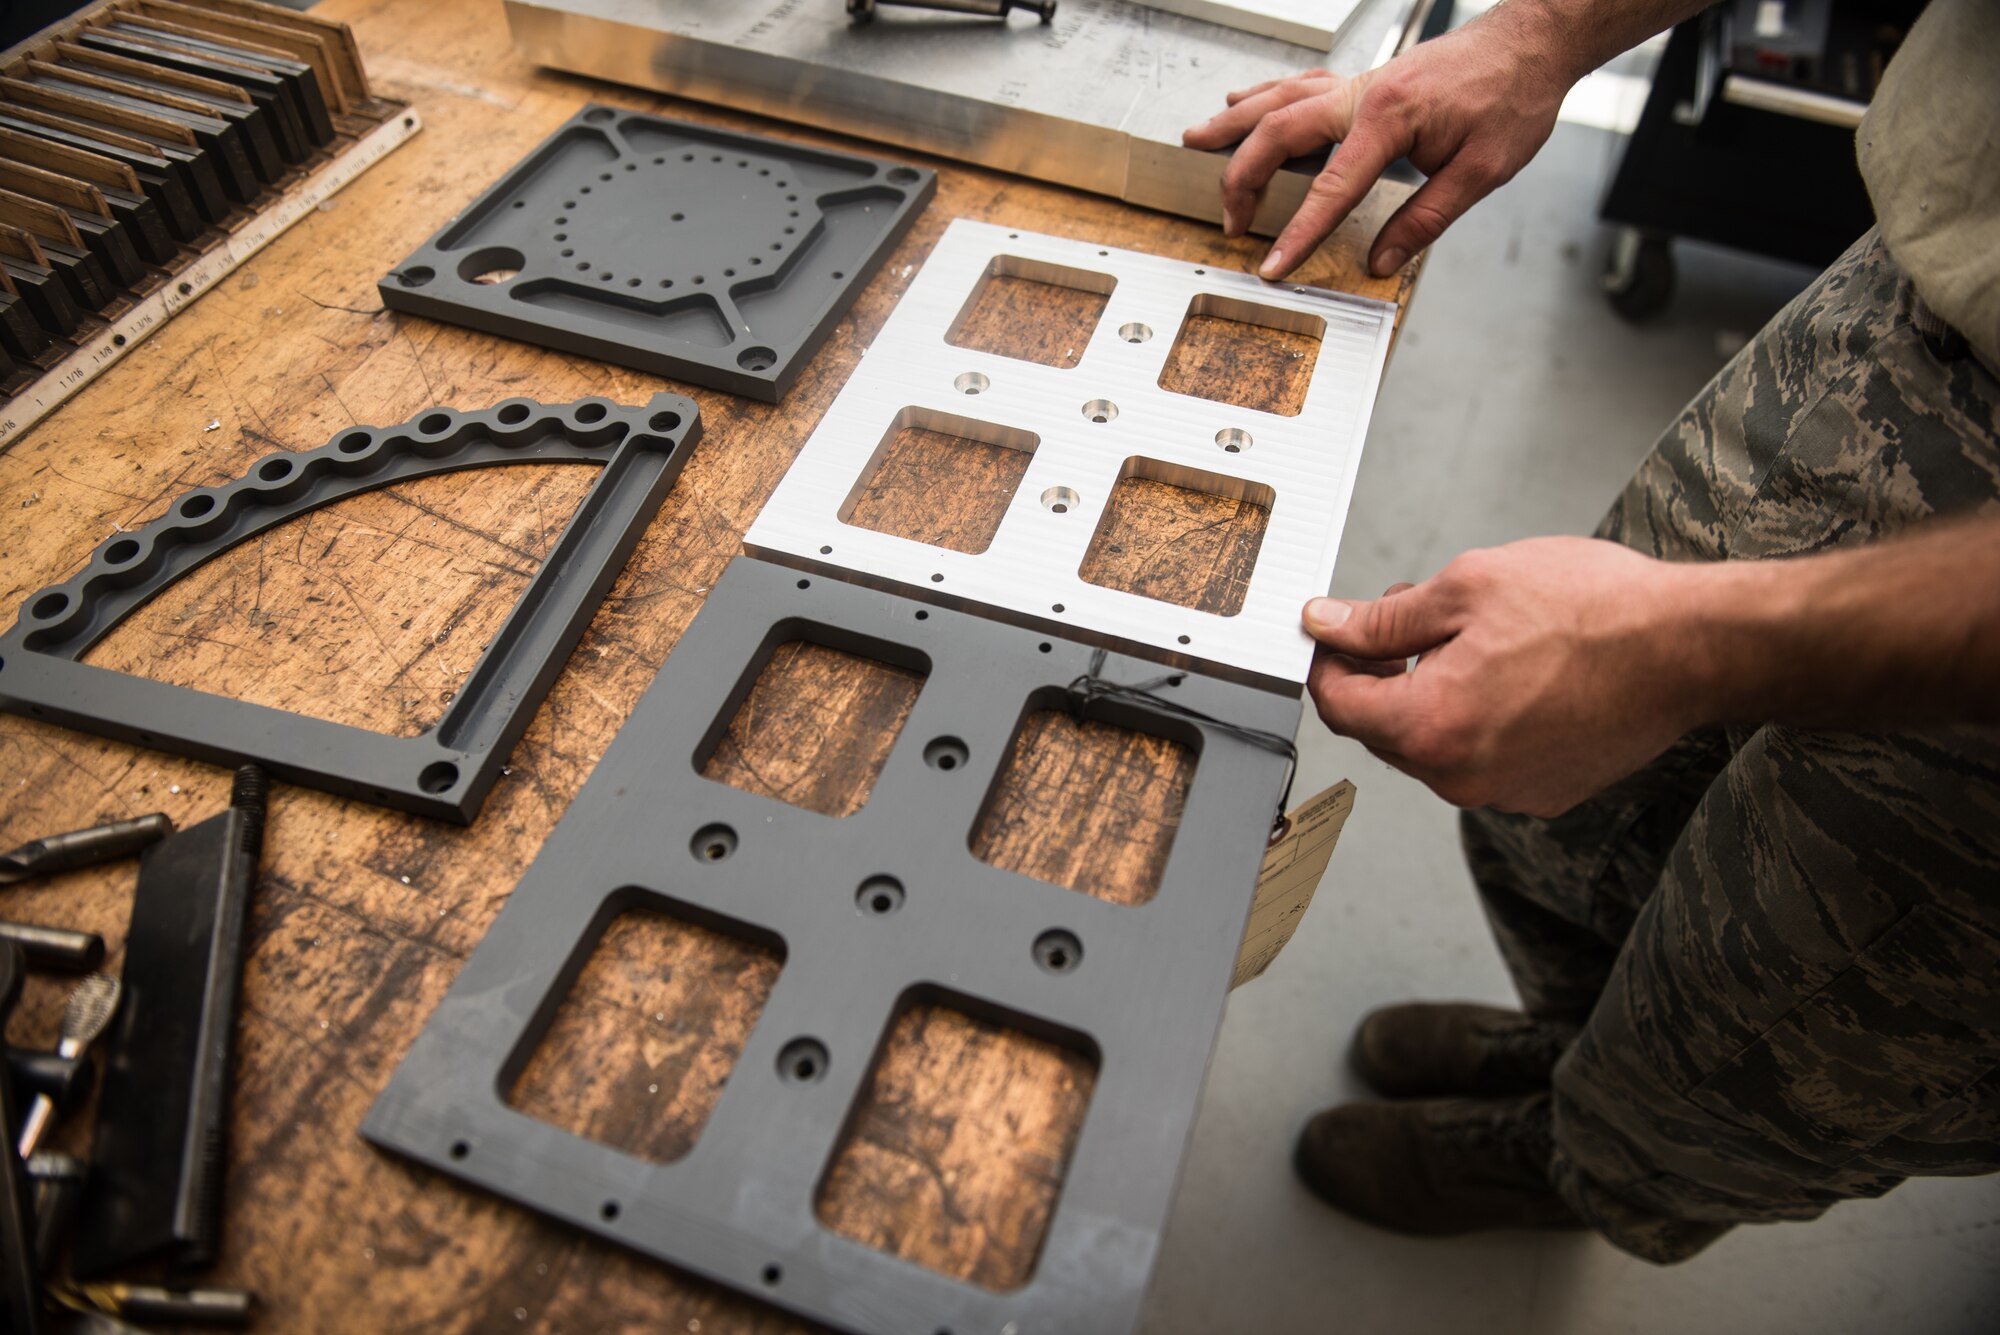 Staff Sgt. Tyler Dickson, 512th Maintenance Squadron aircraft metal technician, inspects HH-60G Pave Hawk plates at Dover Air Force Base, Delaware, Jan. 6, 2019. The 512th MXS plans to manufacture four replicas of each plate to ship to the 920th Rescue Wing at Patrick AFB, Florida. (U.S. Air Force photos by Staff Sgt. Damien Taylor)